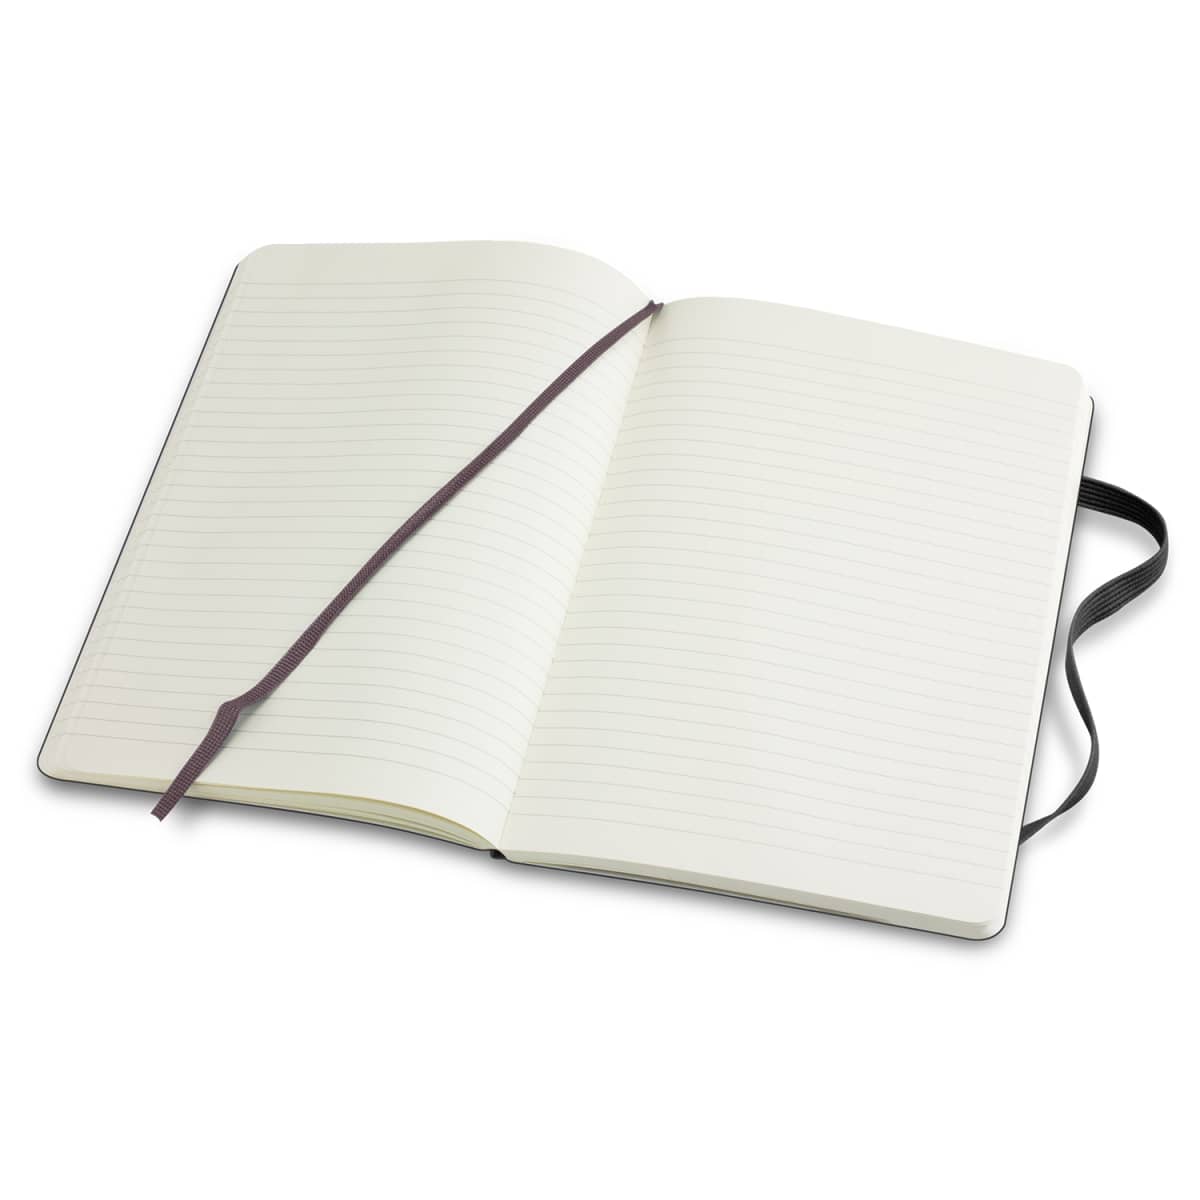 Moleskine Classic Soft Cover Notebook - Large